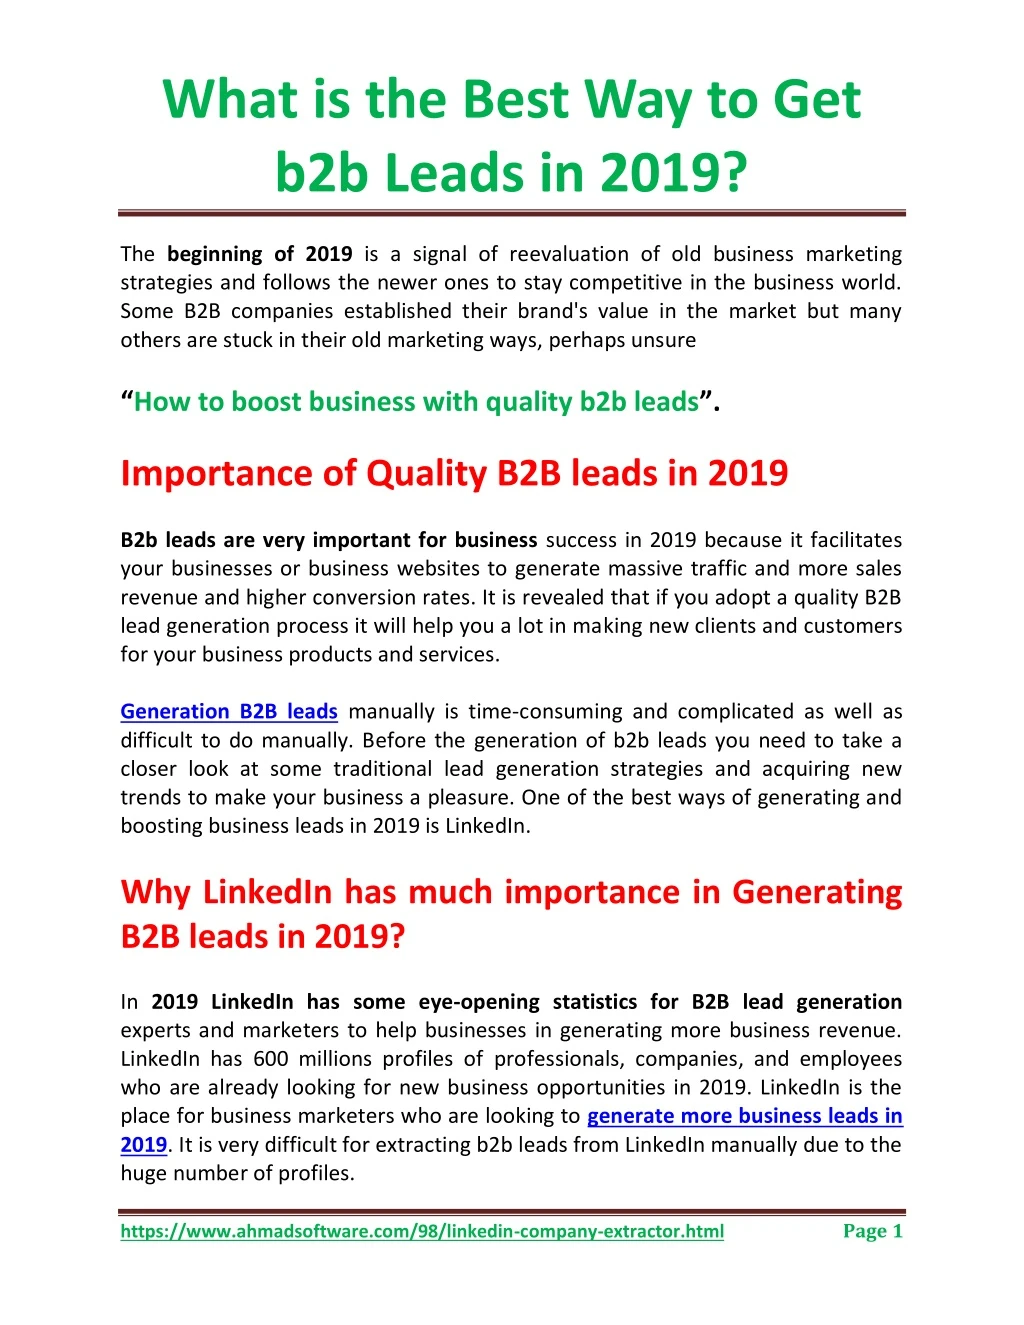 what is the best way to get b2b leads in 2019